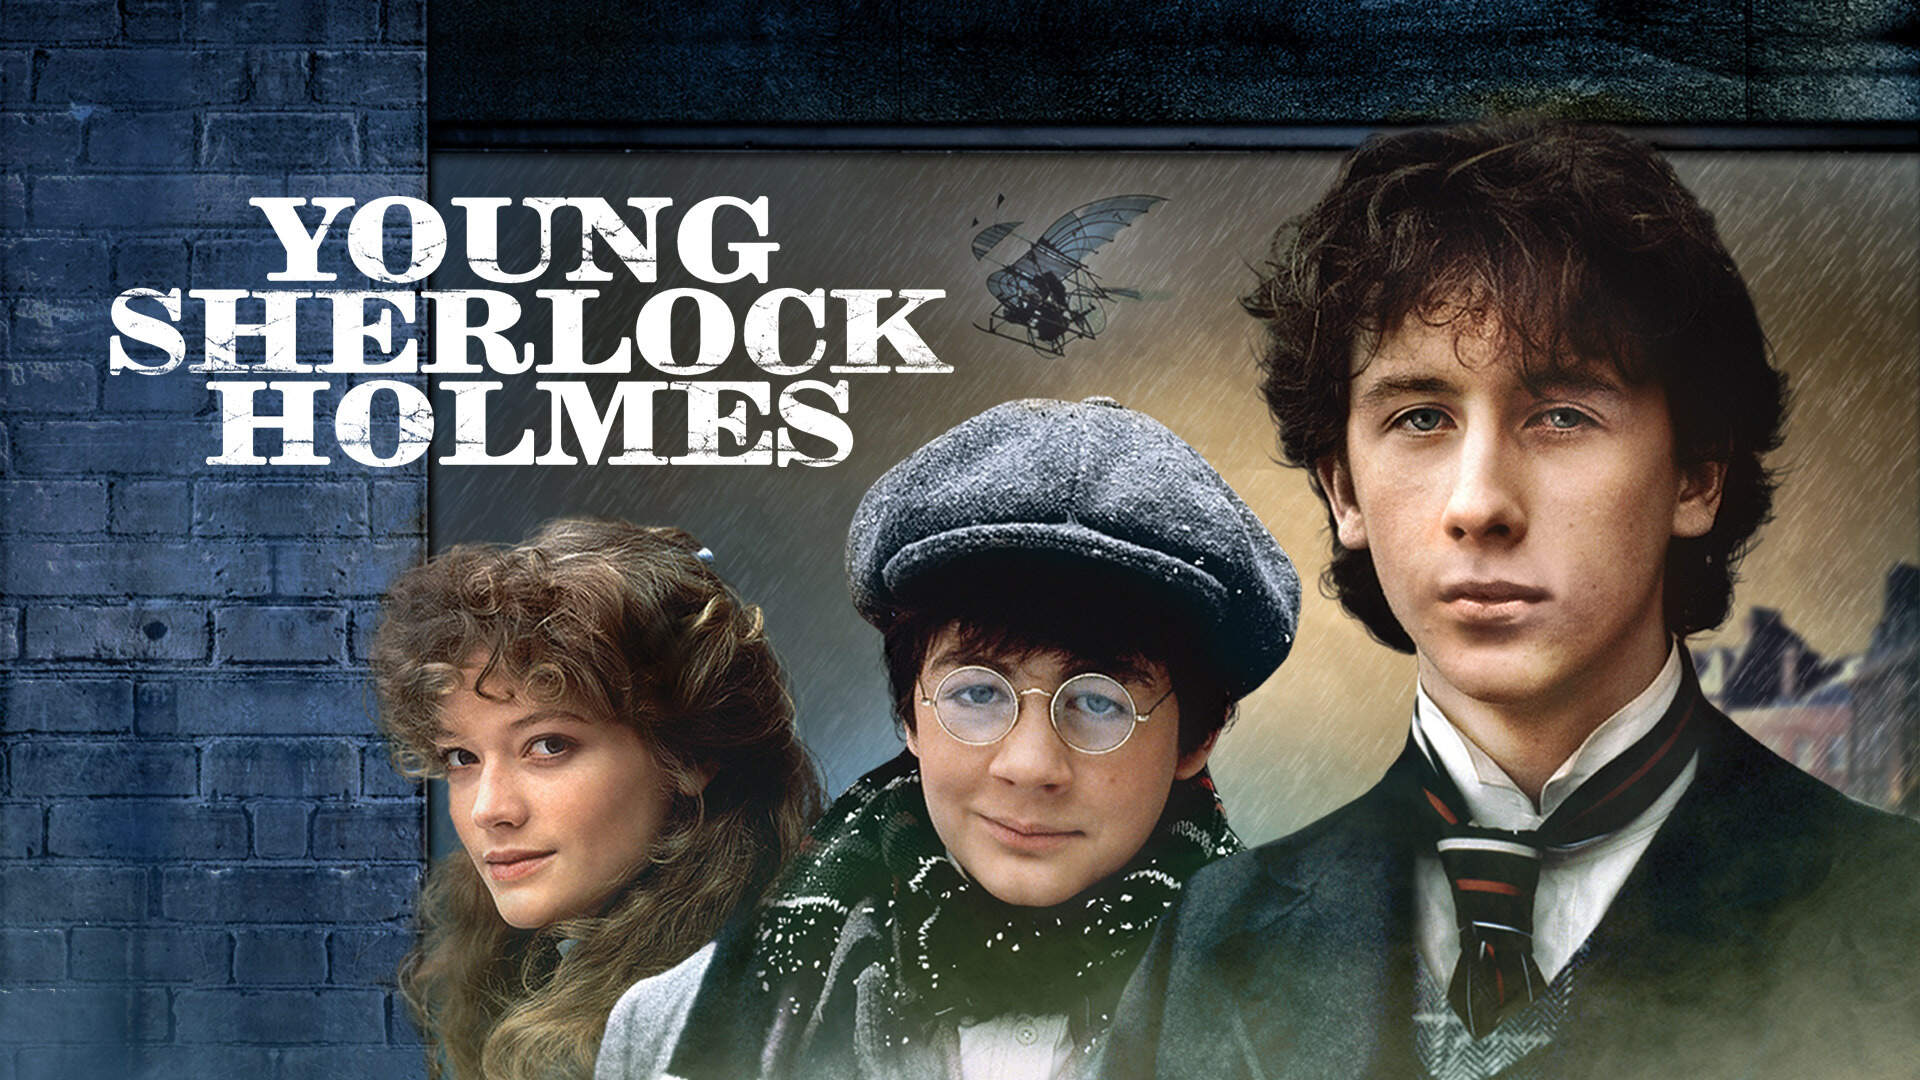 33-facts-about-the-movie-young-sherlock-holmes